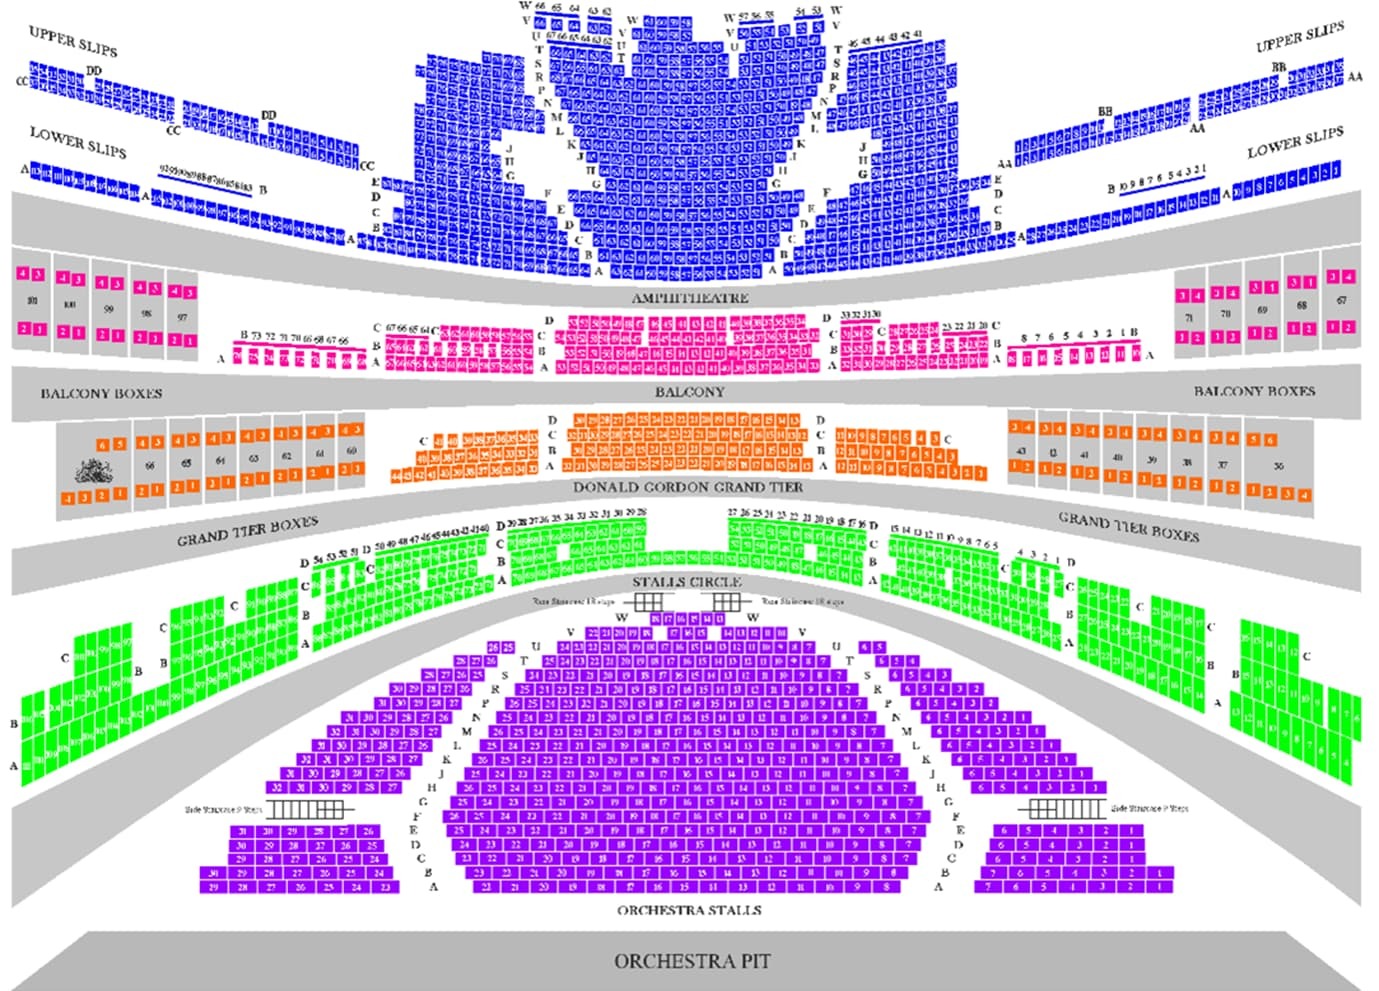 Royal Opera House Best Seats and Seating Plan